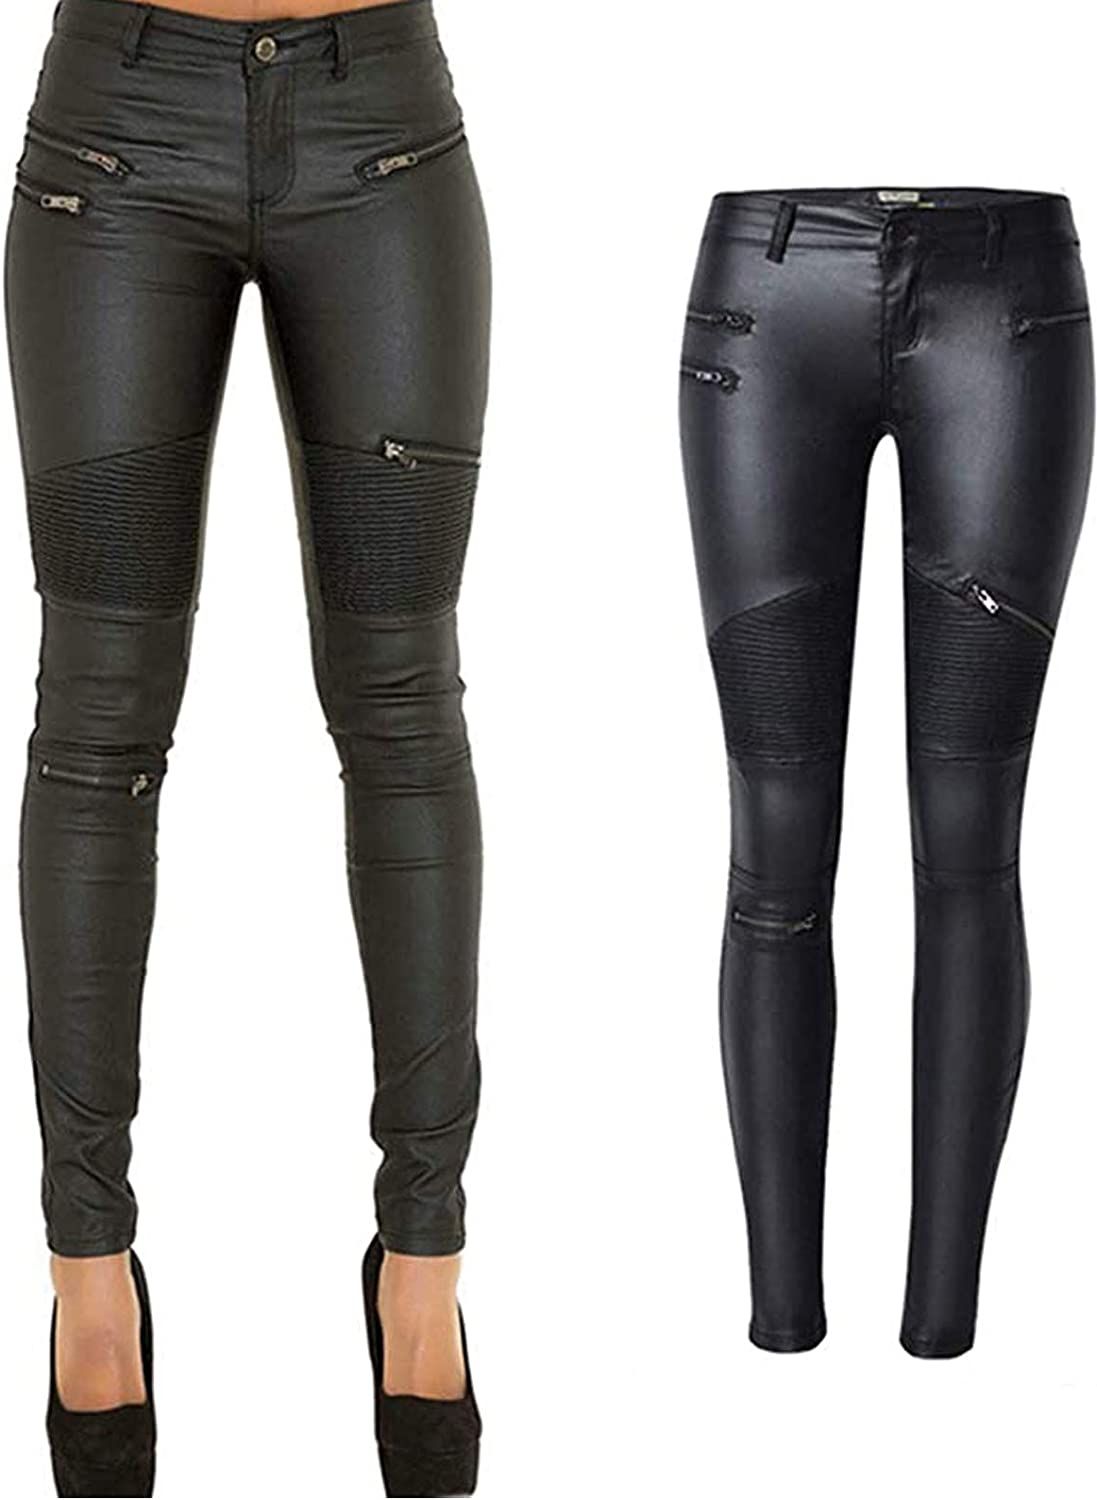 Pu Leather Pants for Women Sexy Tight Stretchy Rider Leggings Black Coffee-USA Size | Amazon (US)